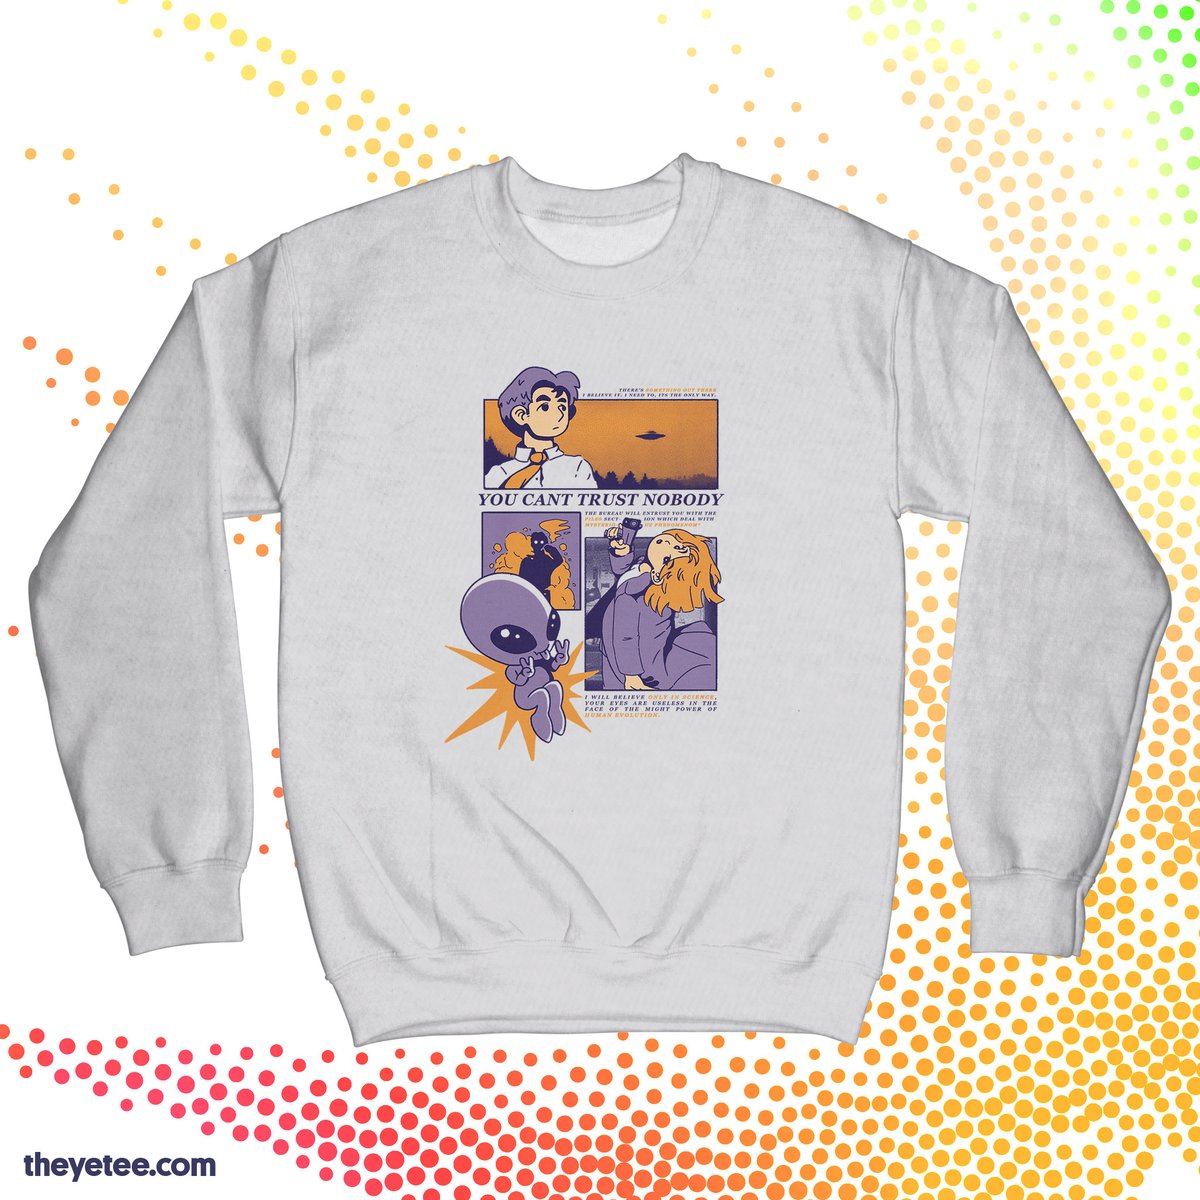 「Feels like something's always just barel」|The Yetee 🌈のイラスト